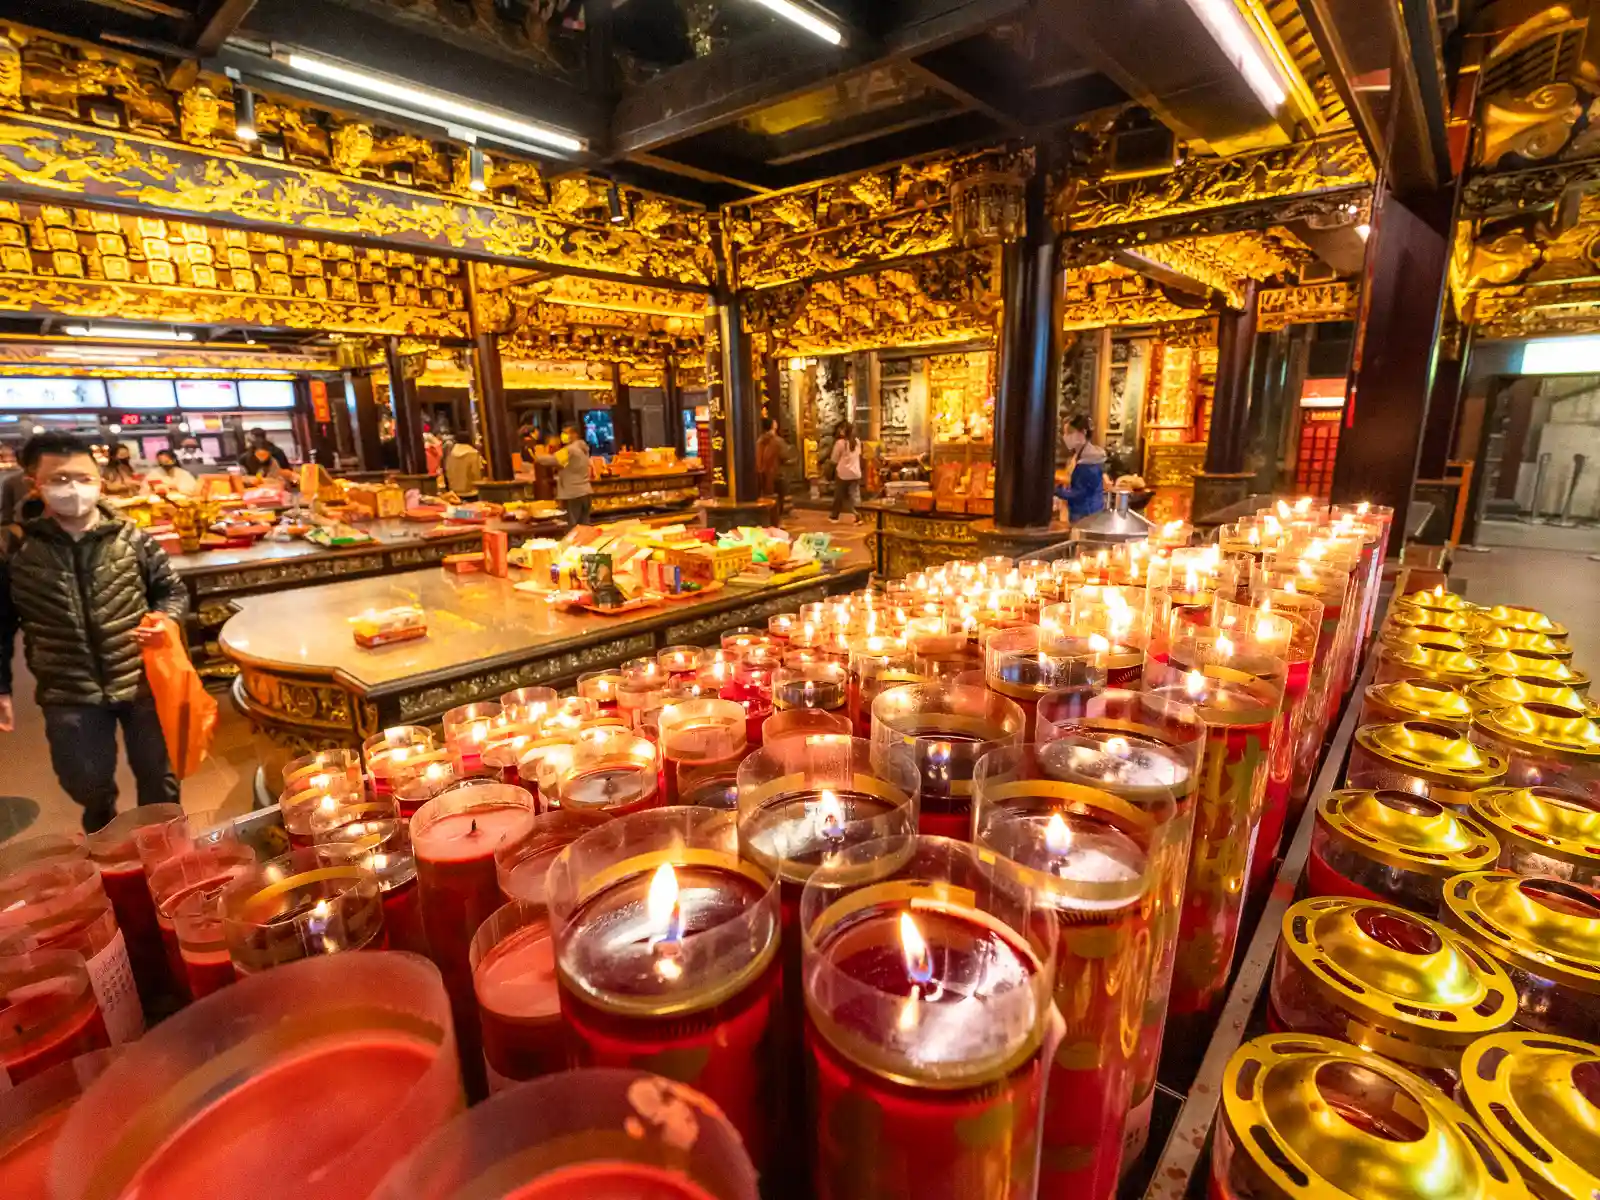 Rows of candles are burning on a table inside a room with a beautiful painted golden ceiling; sacrificial paper money is piled on adjacent tables.